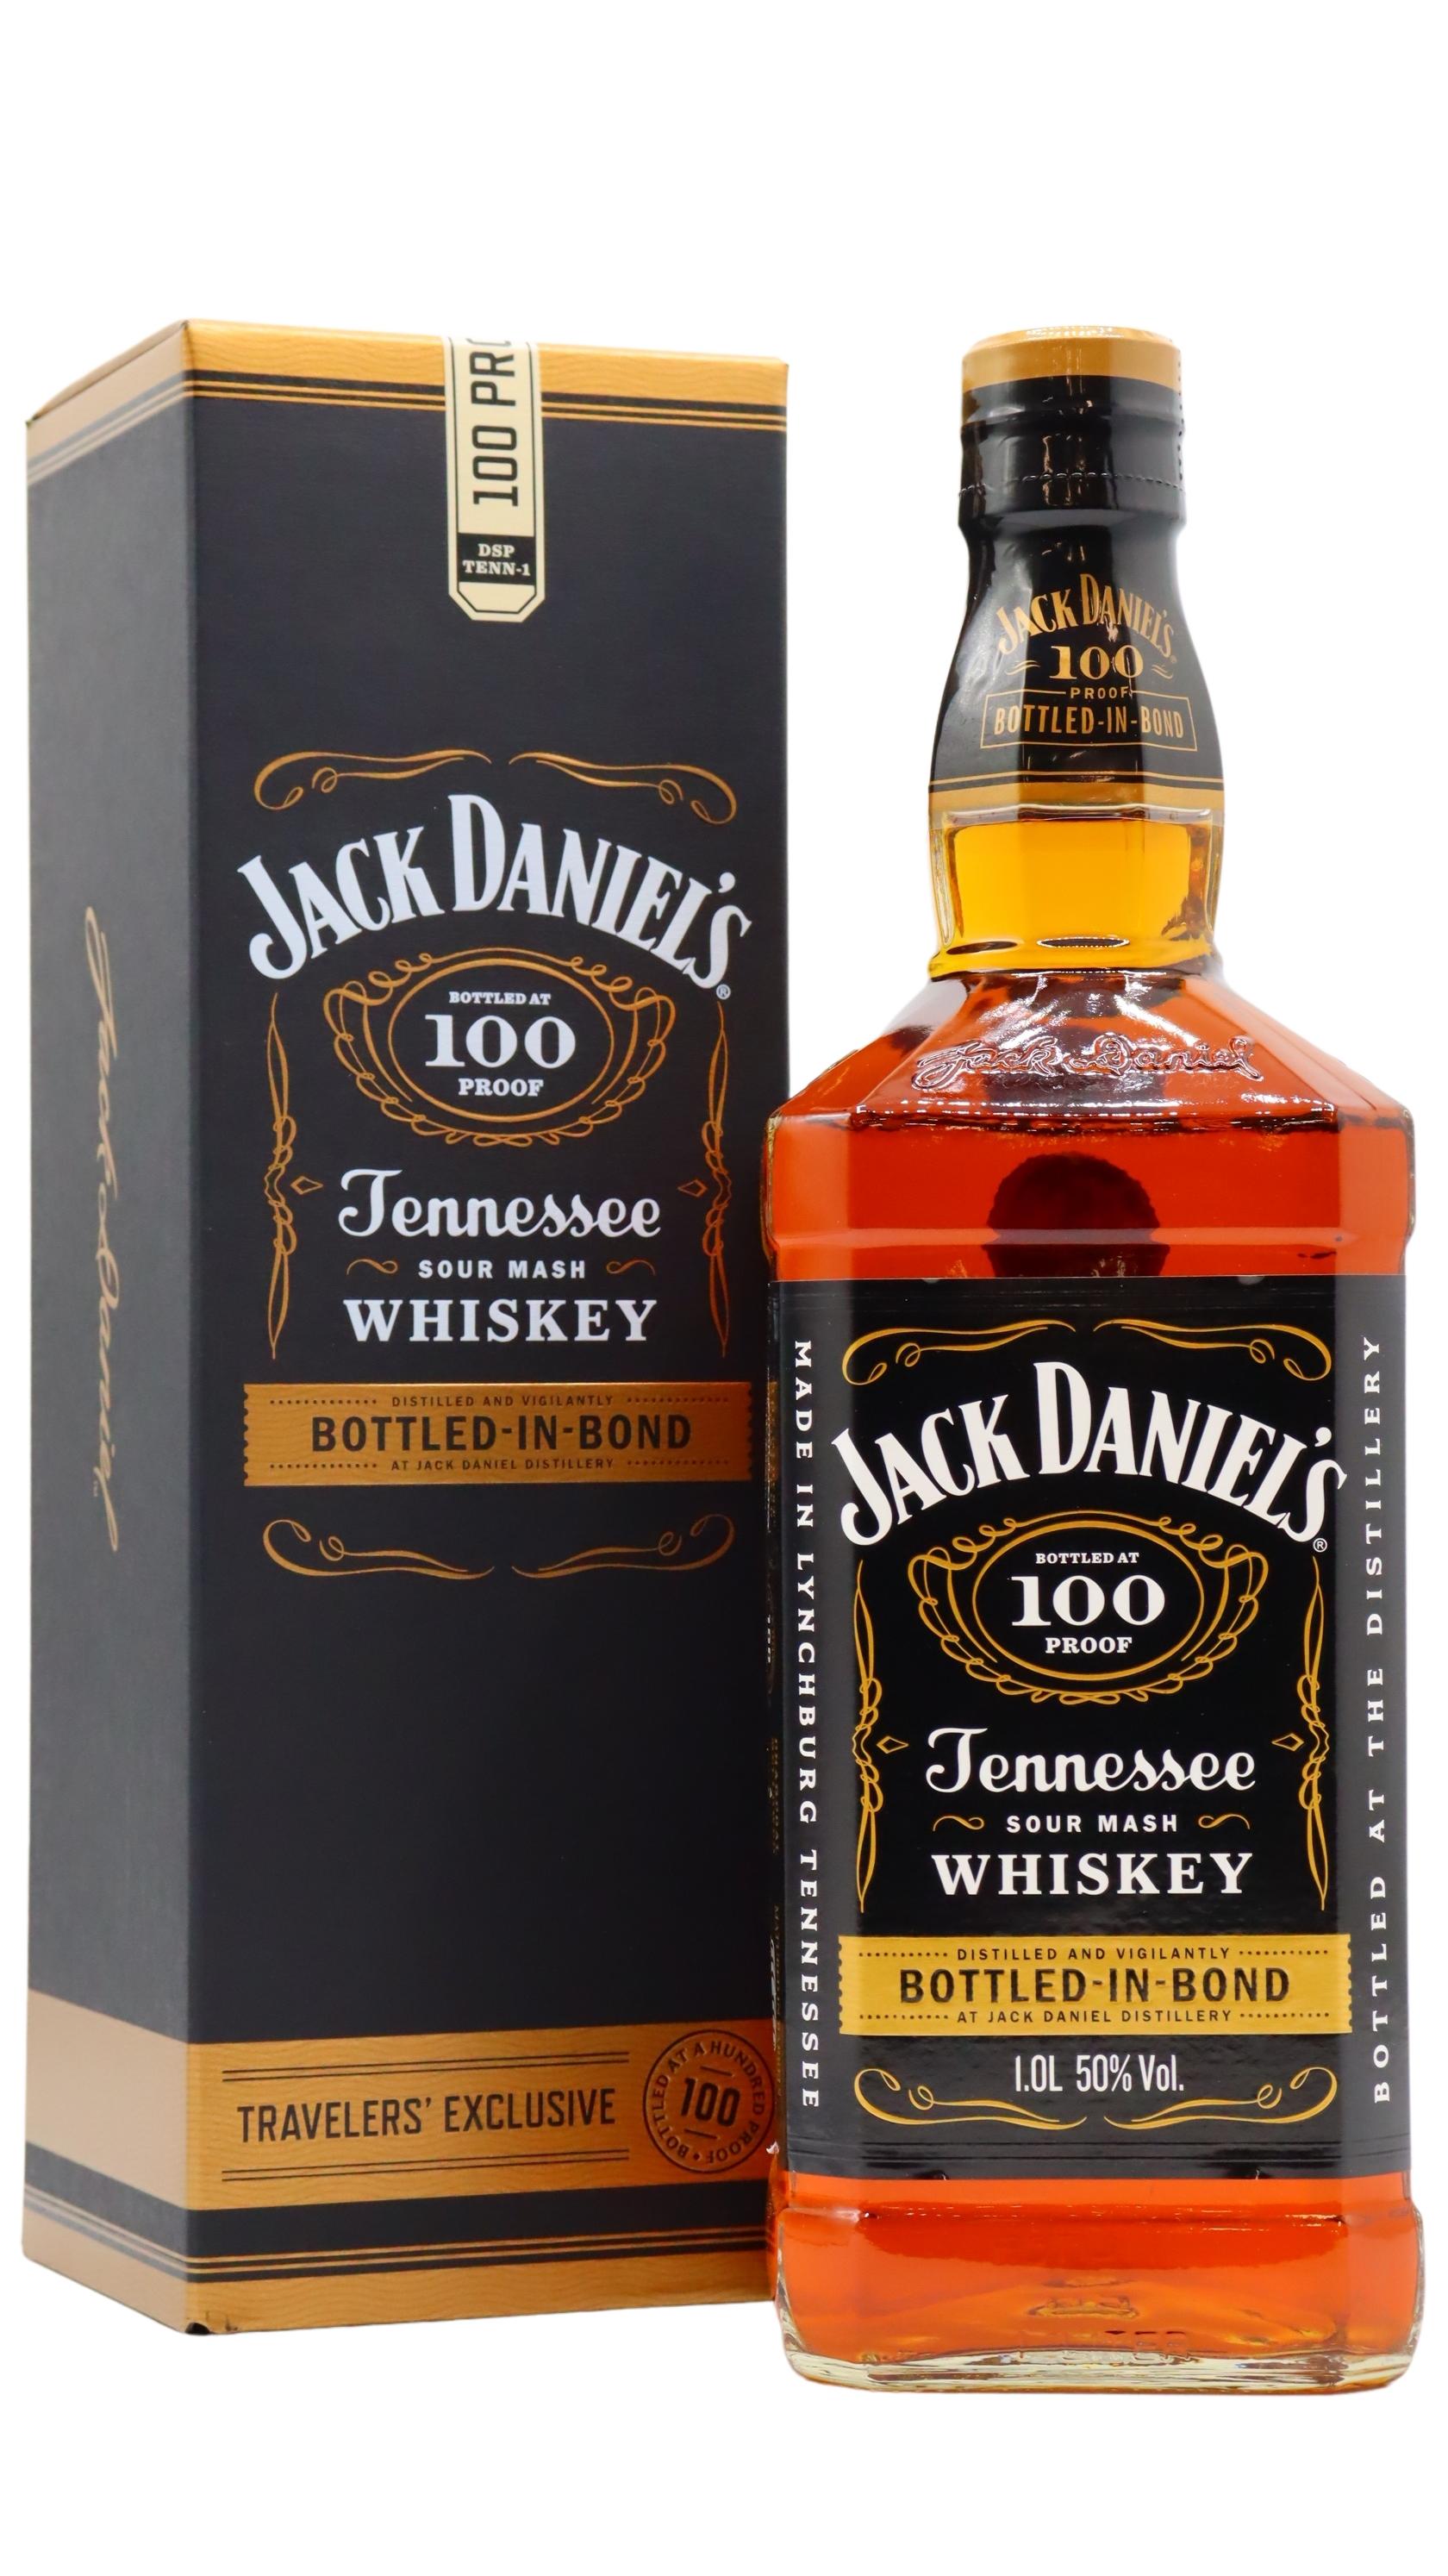 Things You Should Know Before Buying Jack Daniel's - Jack Daniels